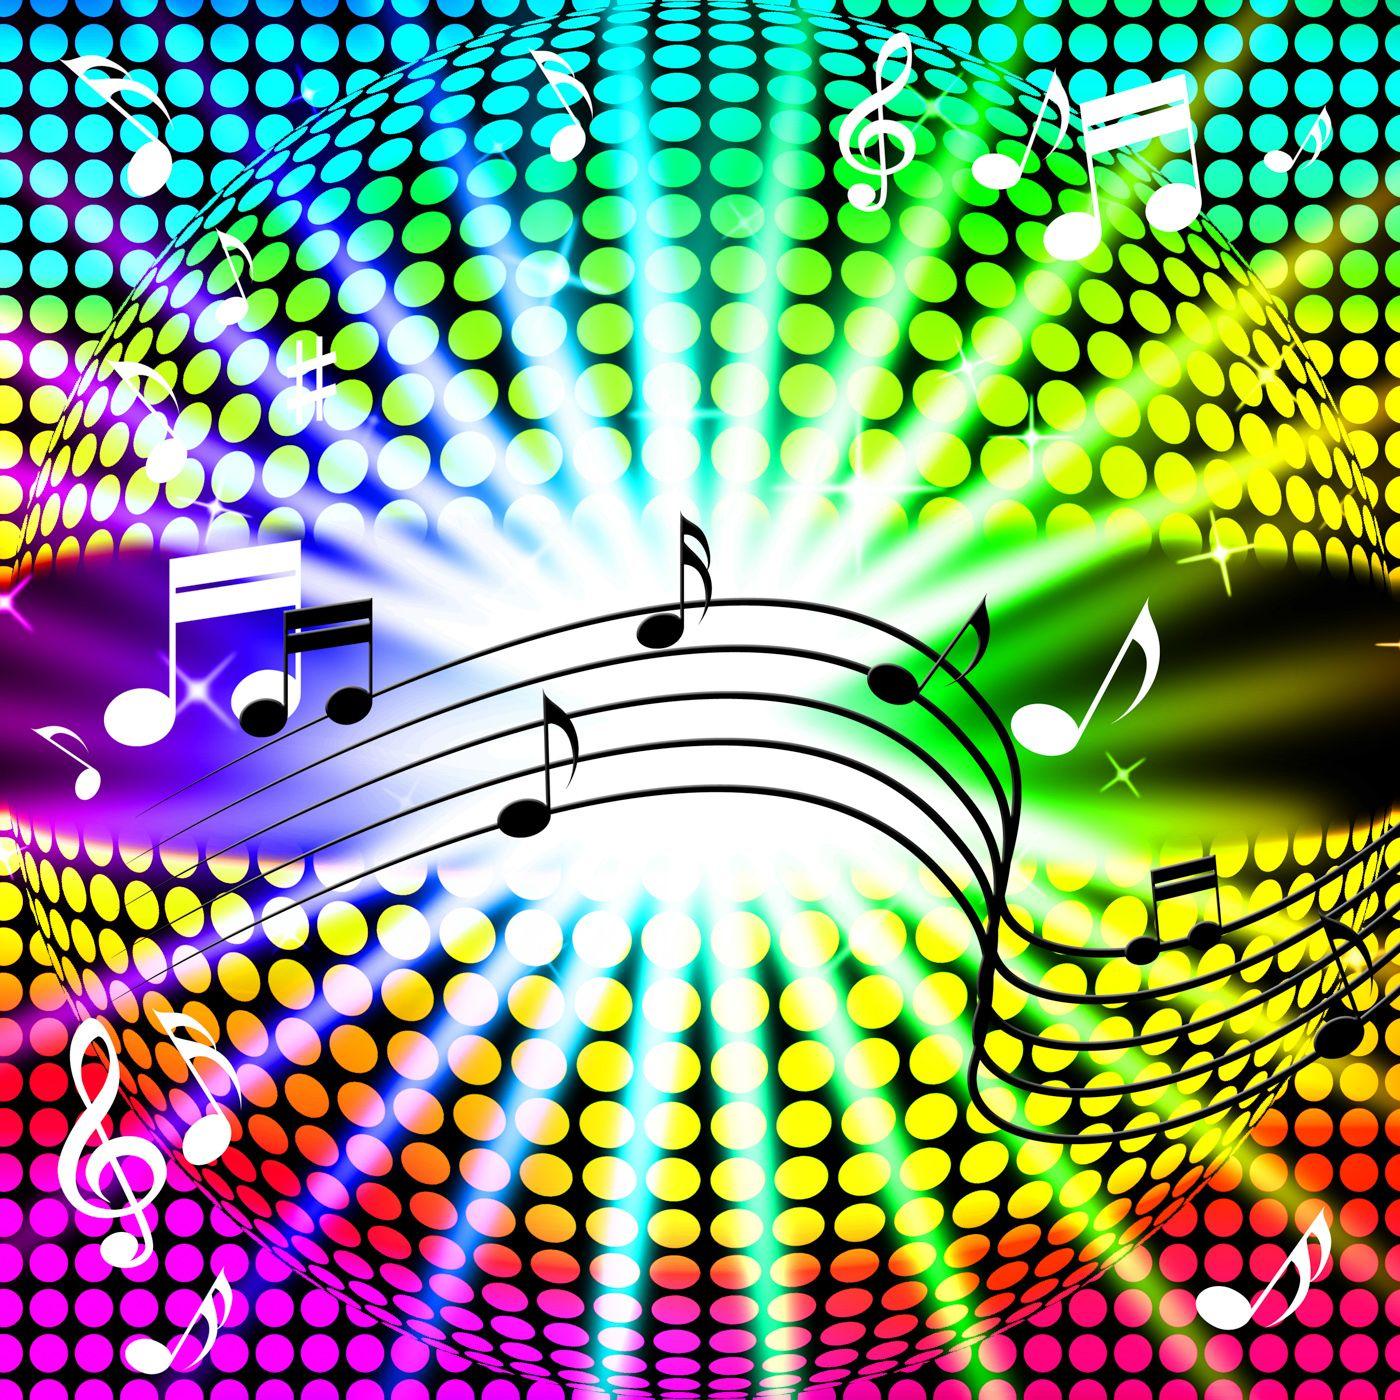 Free photo: Music Disco Ball Background Shows Songs Dancing